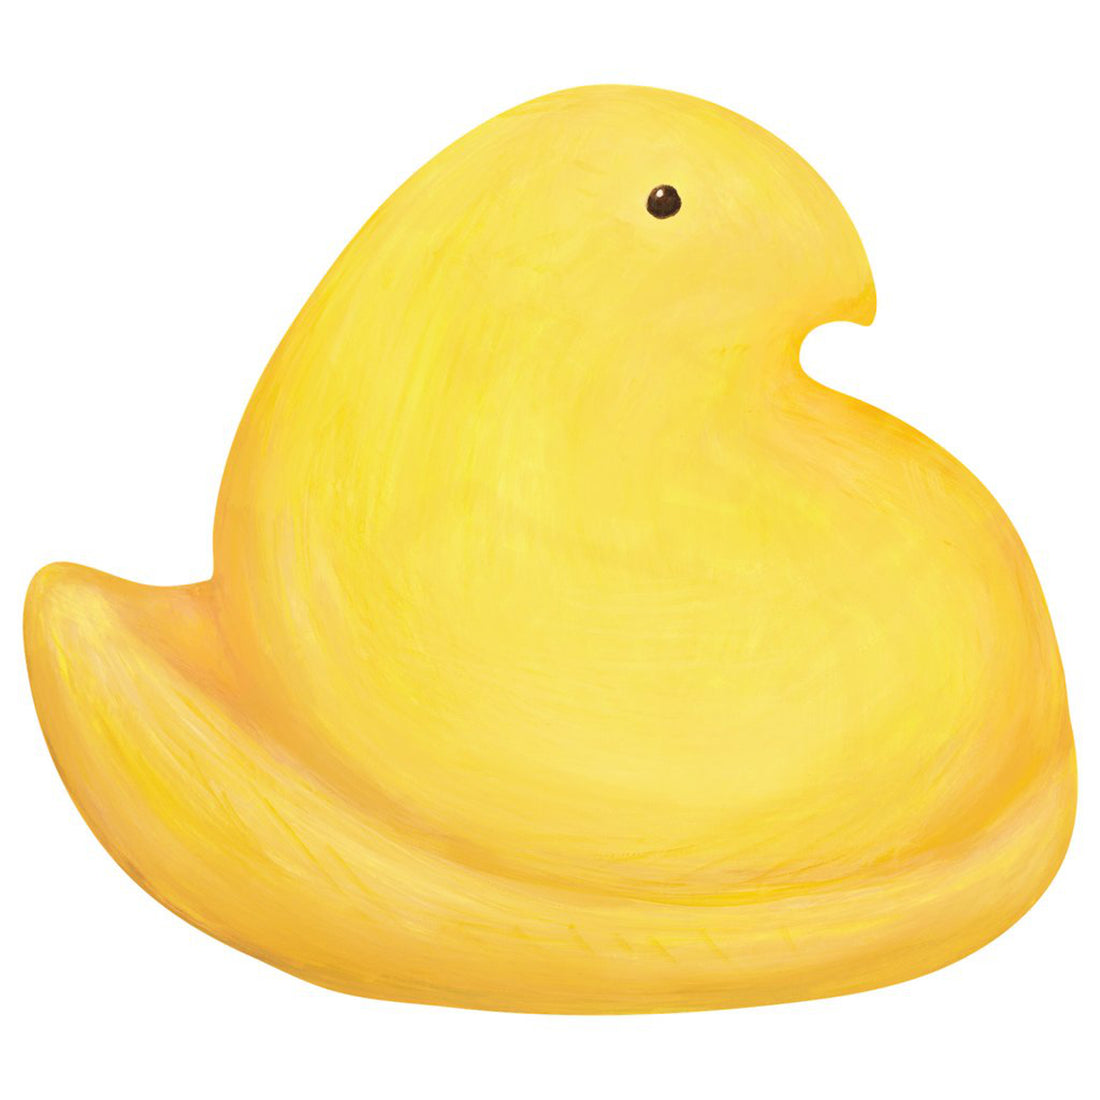 A die-cut illustration of a large, bright yellow  PEEPS® marshmallow chick with a small black eye.